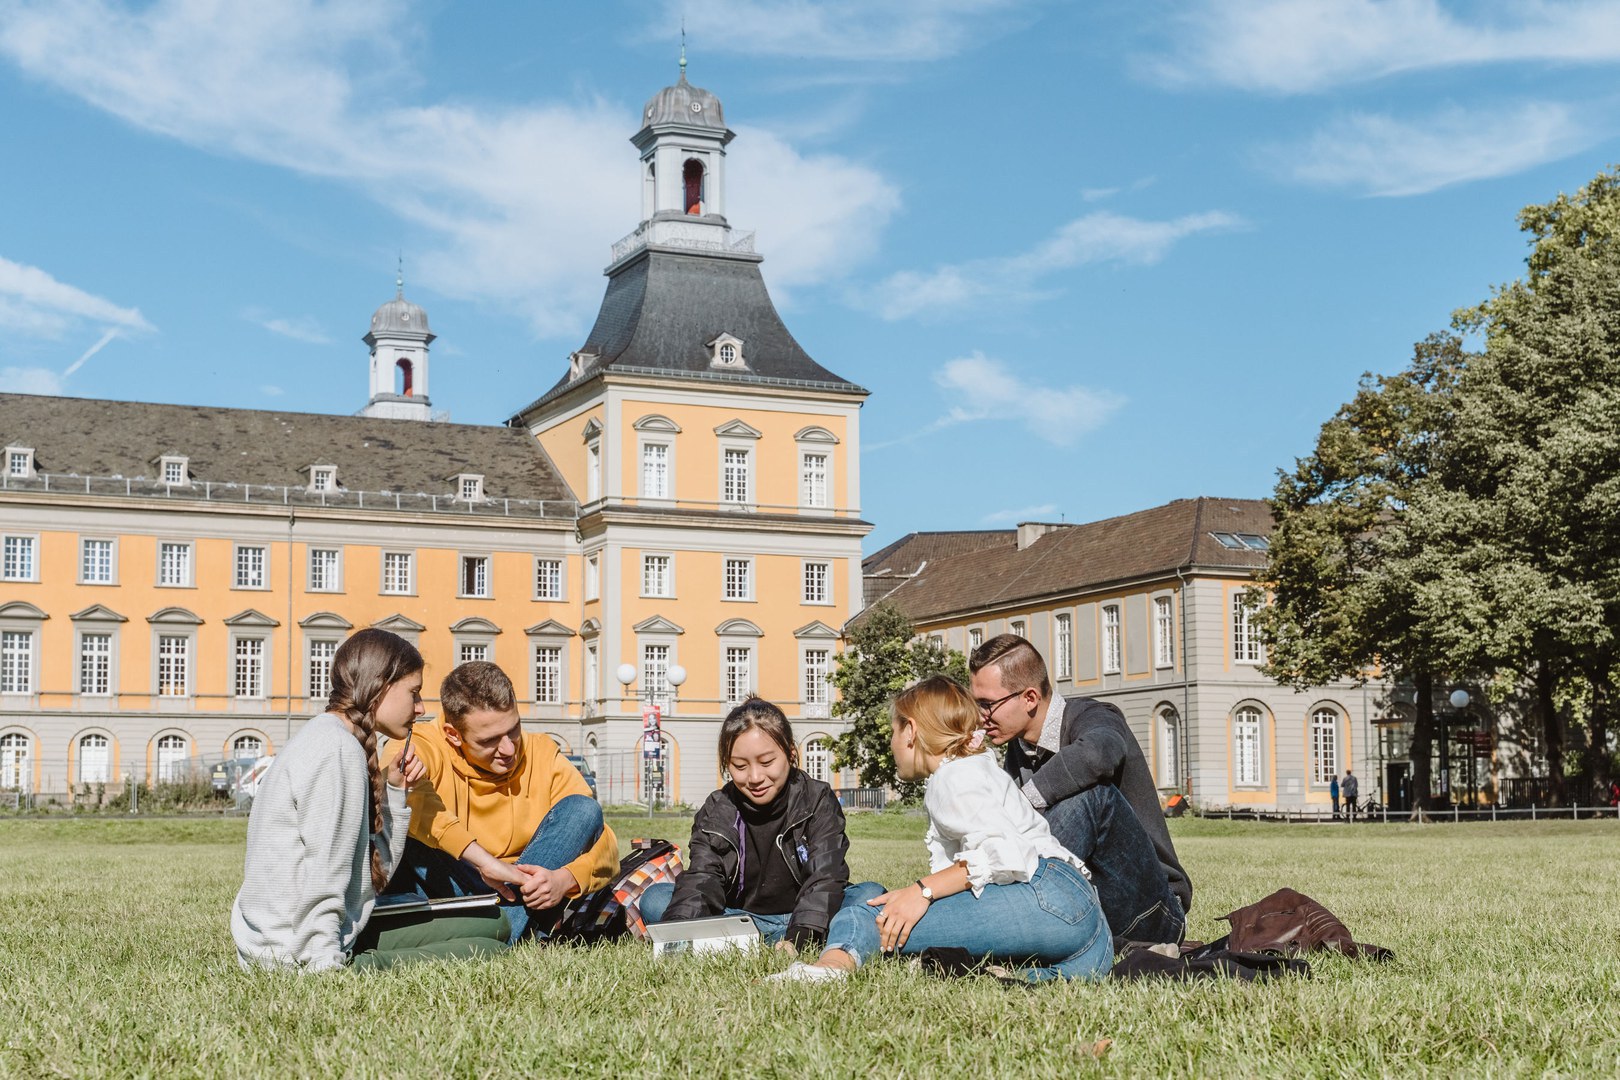 Leiden Ranking: The University of Bonn is a Top-Level Research Institution and Strong in International Collaboration - The latest rankings have again shown that the University of Bonn is a leading scientific-academic institution and a significant player in international research.